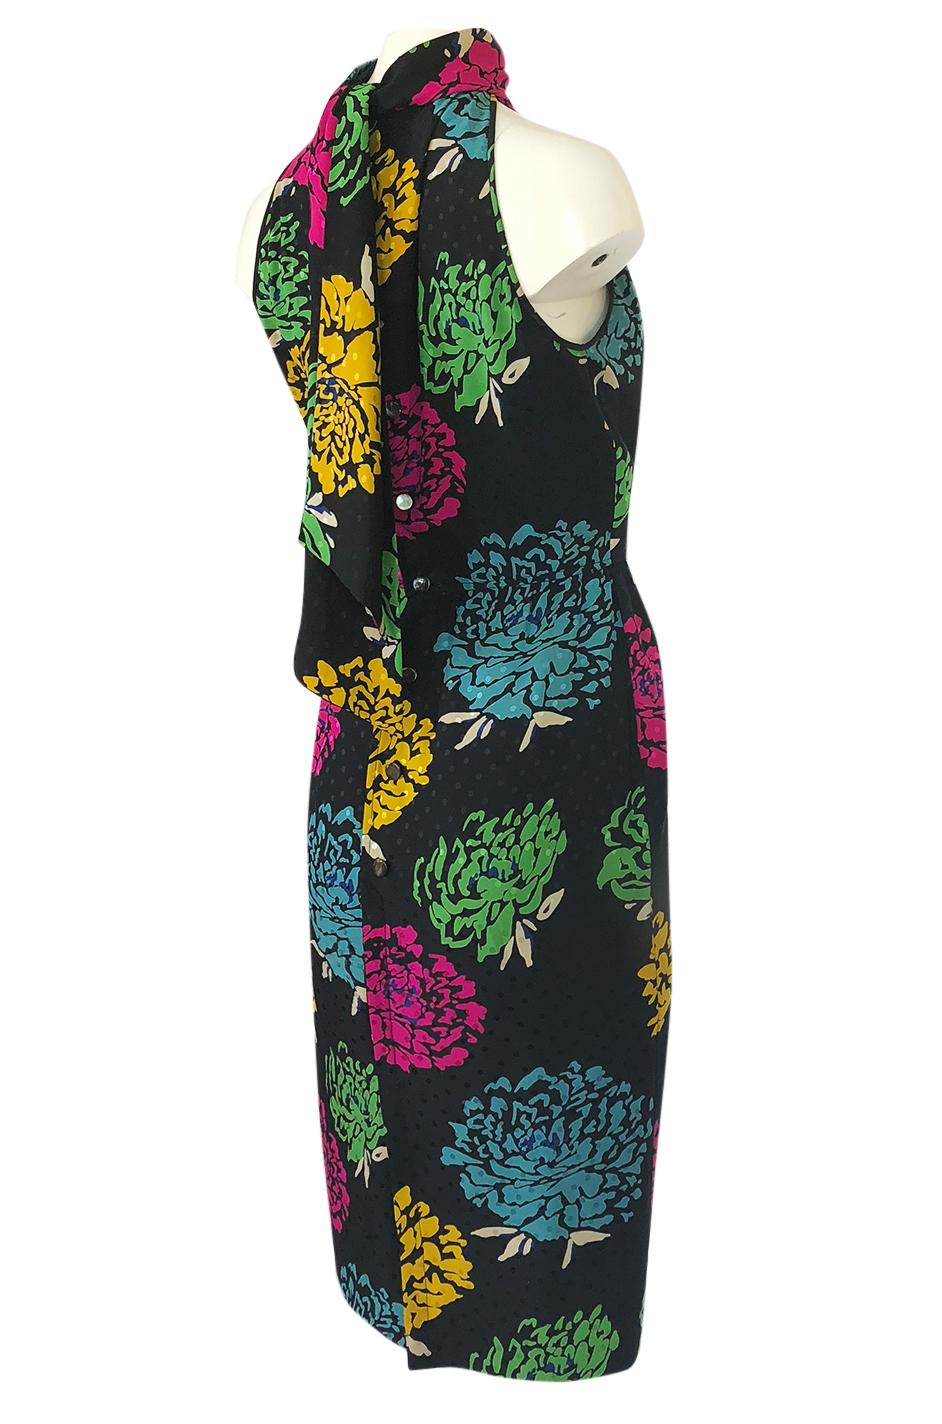 This is a fabulous little Emanuel Ungaro dress with the prettiest floral print running over its surface. It somehow manages to be dramatic, sexy and yet pretty and sweet all at once. Ungaro started out as a designer who did very structural and